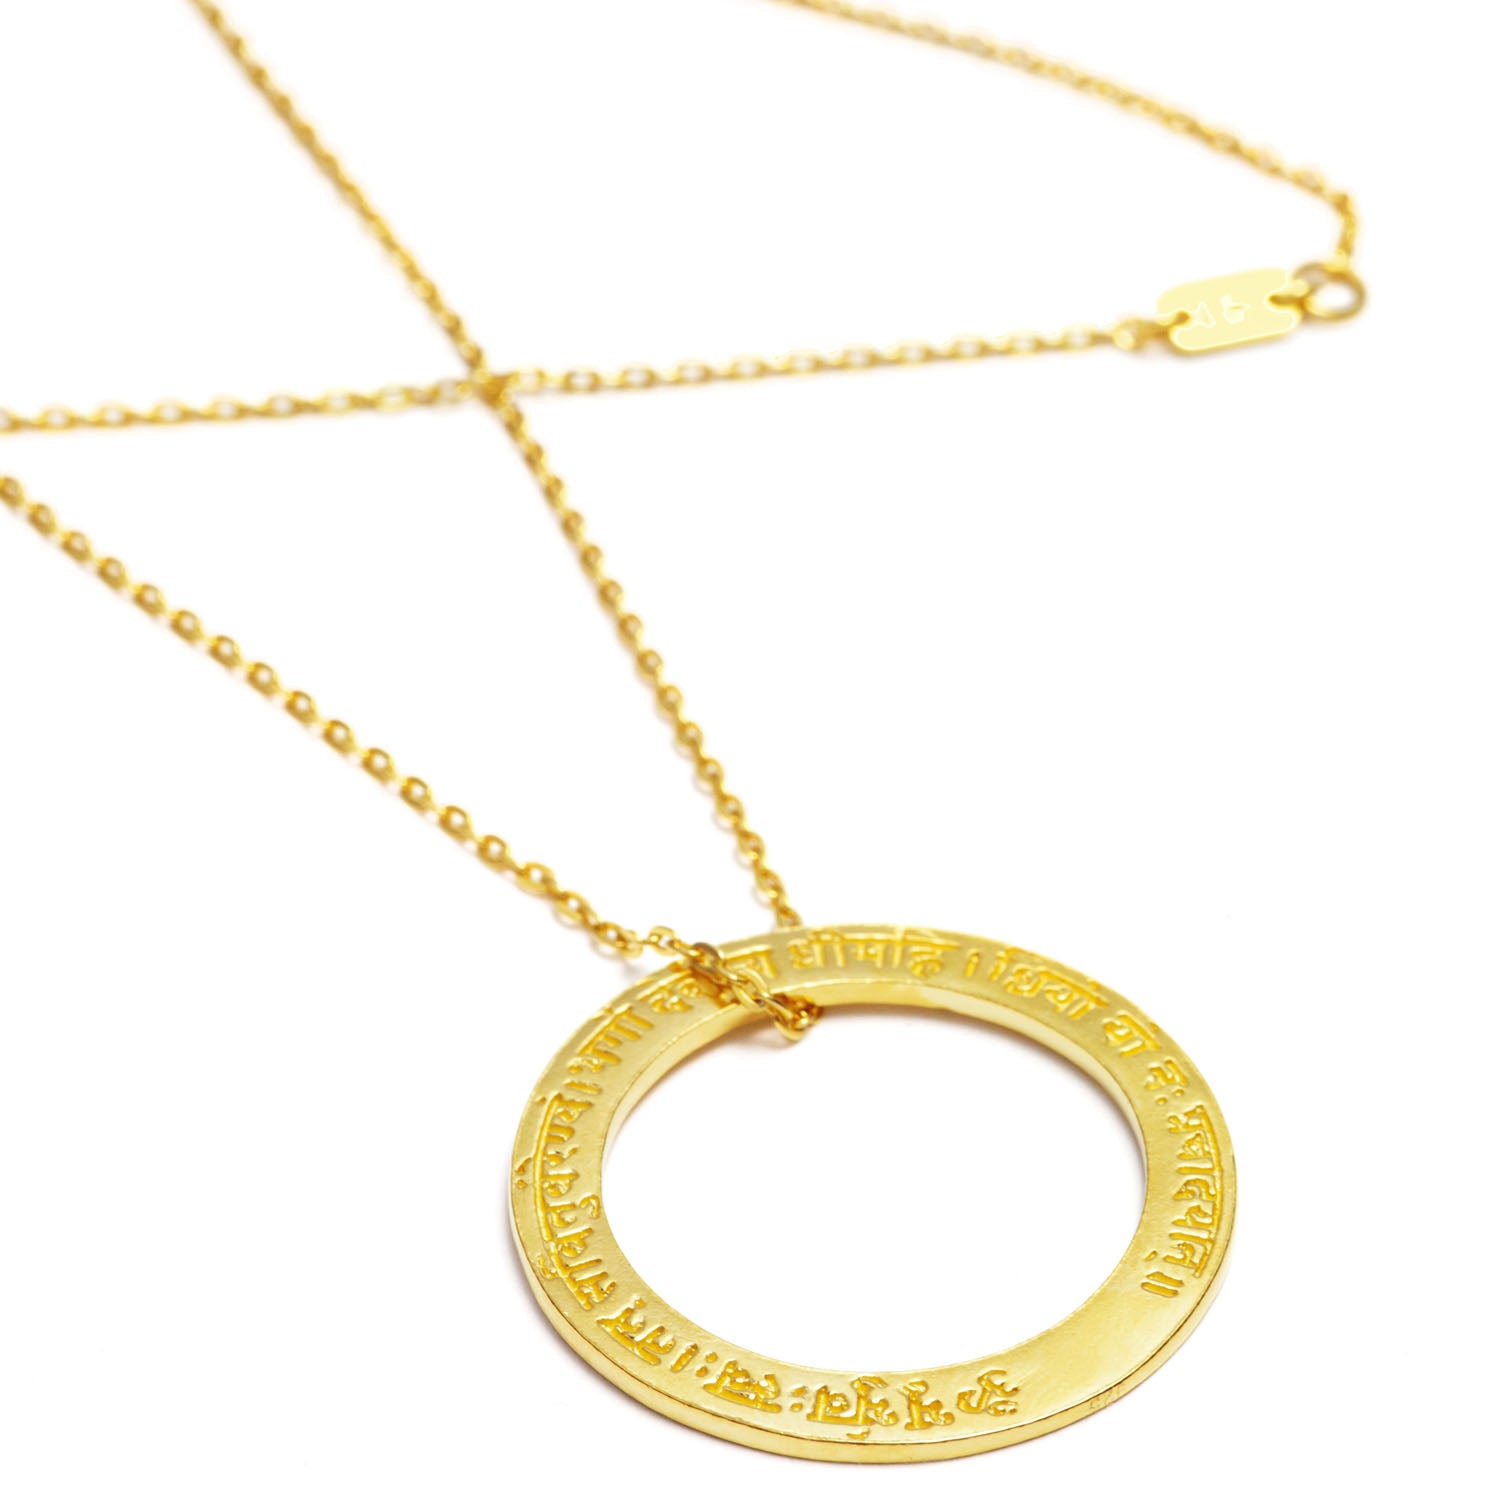 24k Gold Plated Sterling Silver Gayatri Mantra Pendant from Eternal Bliss from the Yoga Jewelry Collection